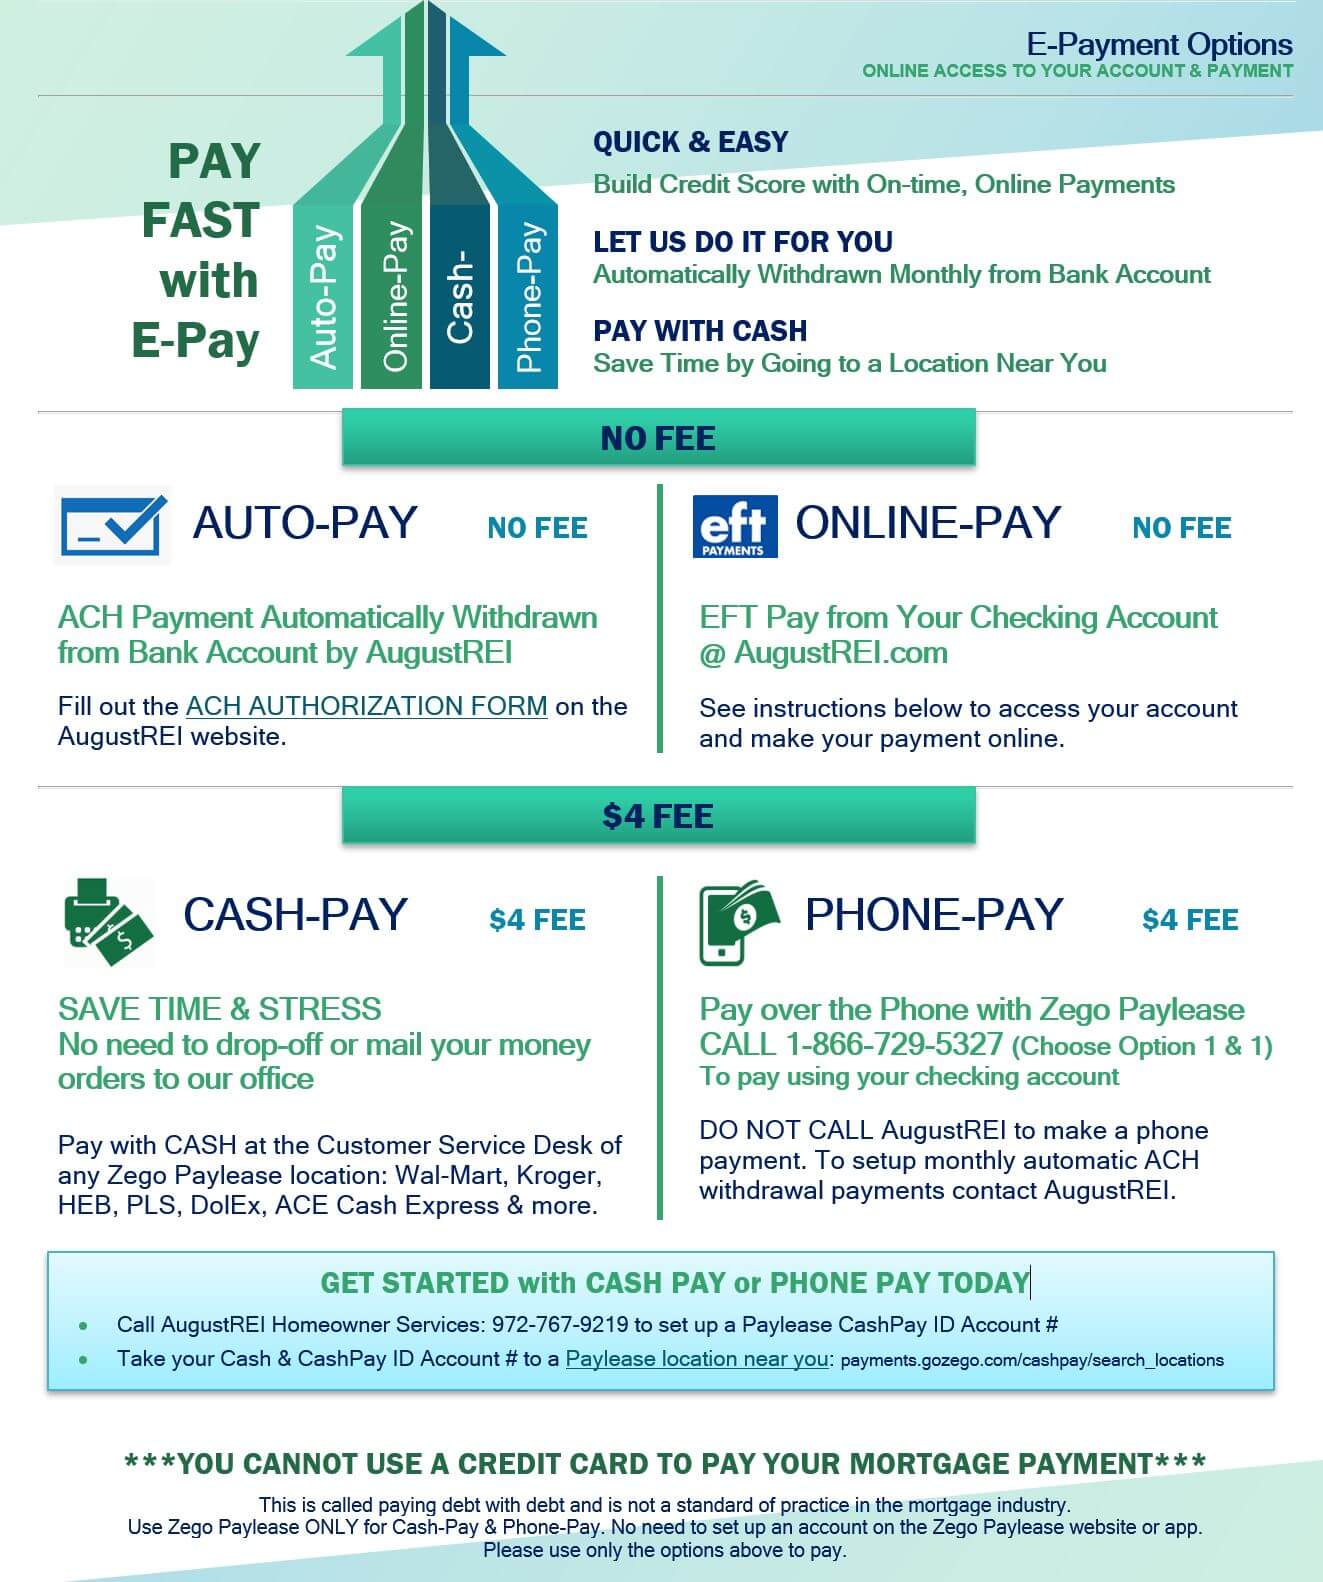 E-Payment Options